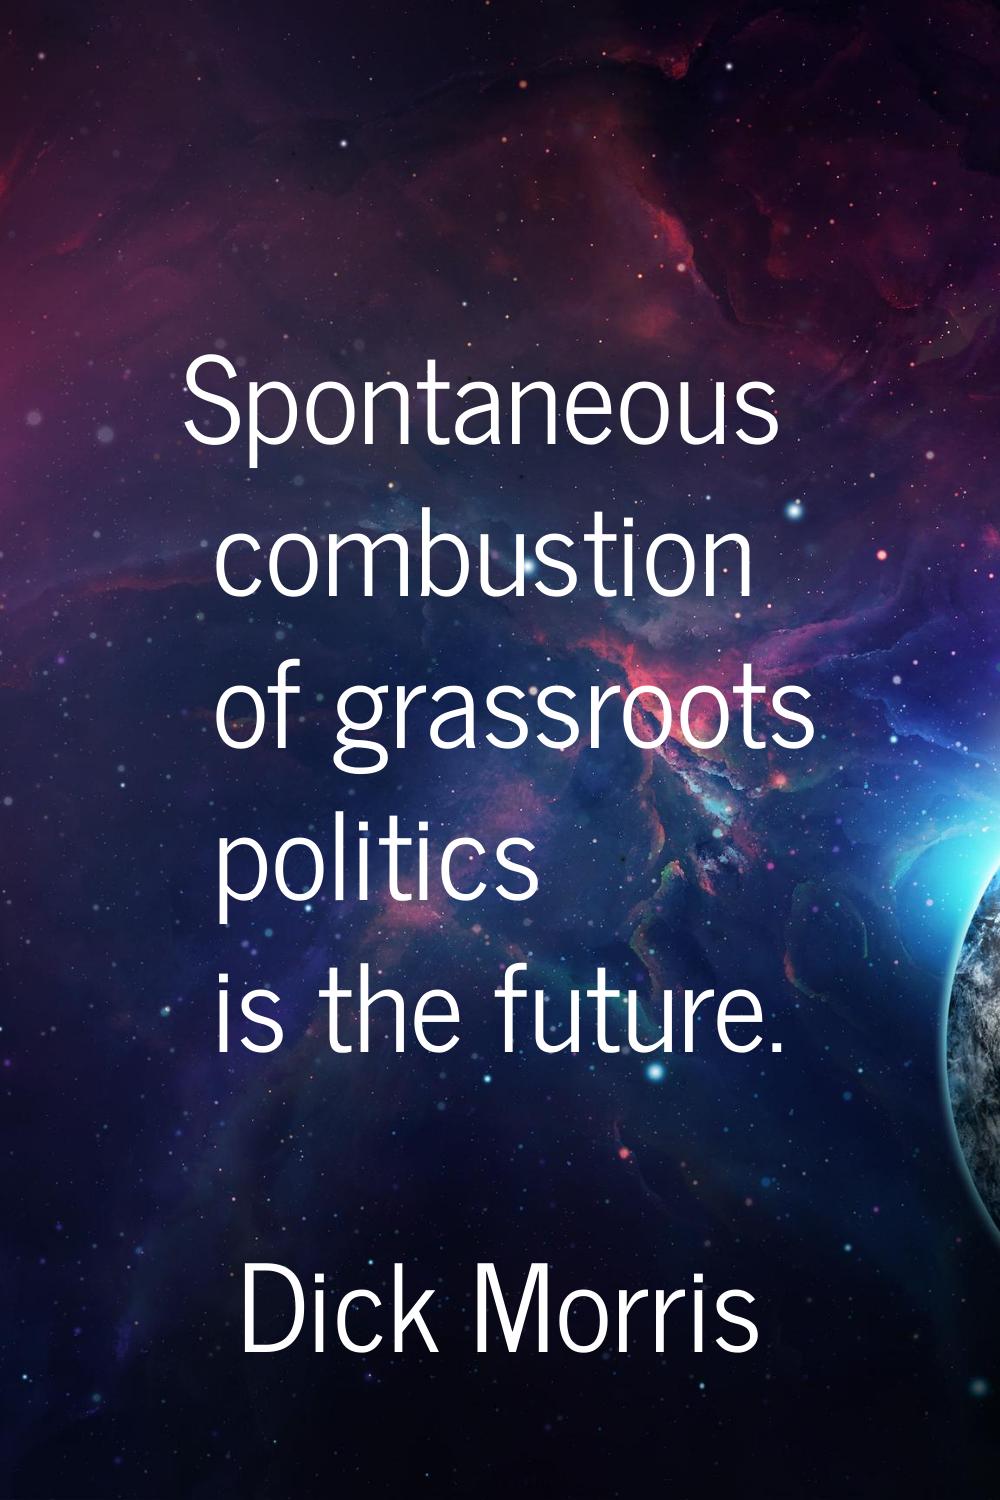 Spontaneous combustion of grassroots politics is the future.